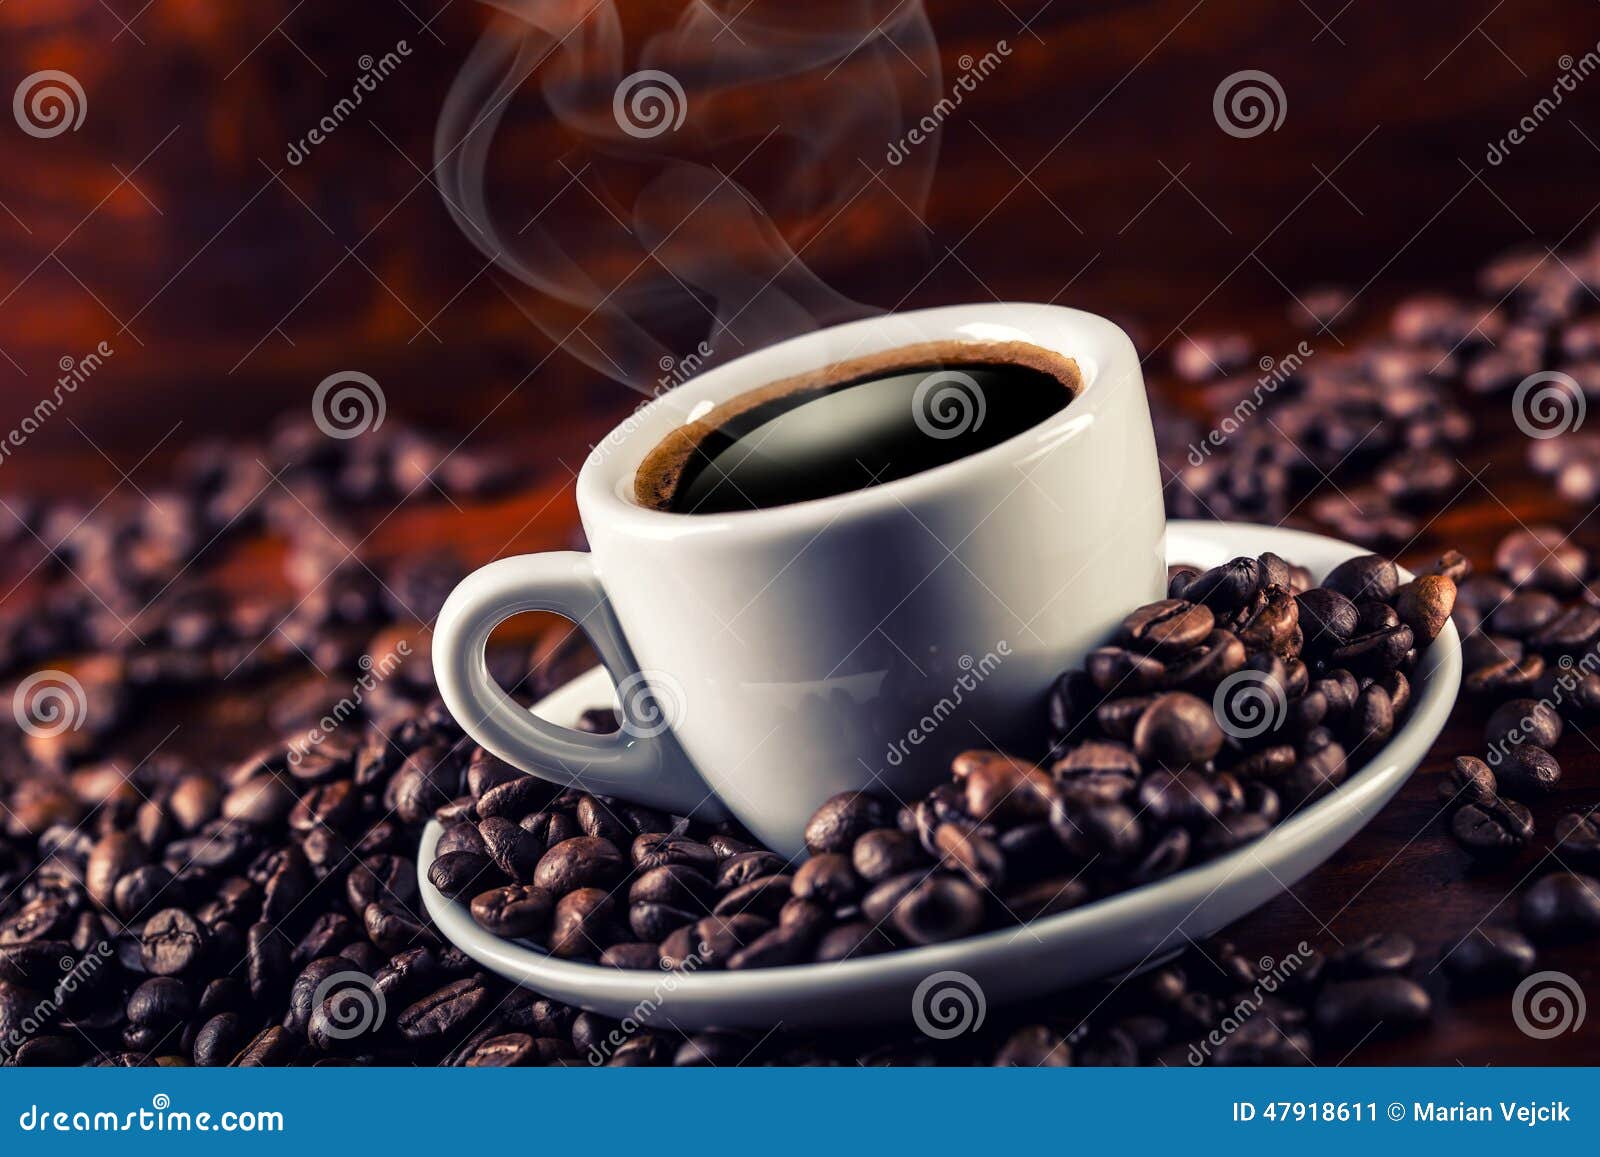 Cup Of Black  Coffee  And Spilled Coffee  Beans  Stock Image 